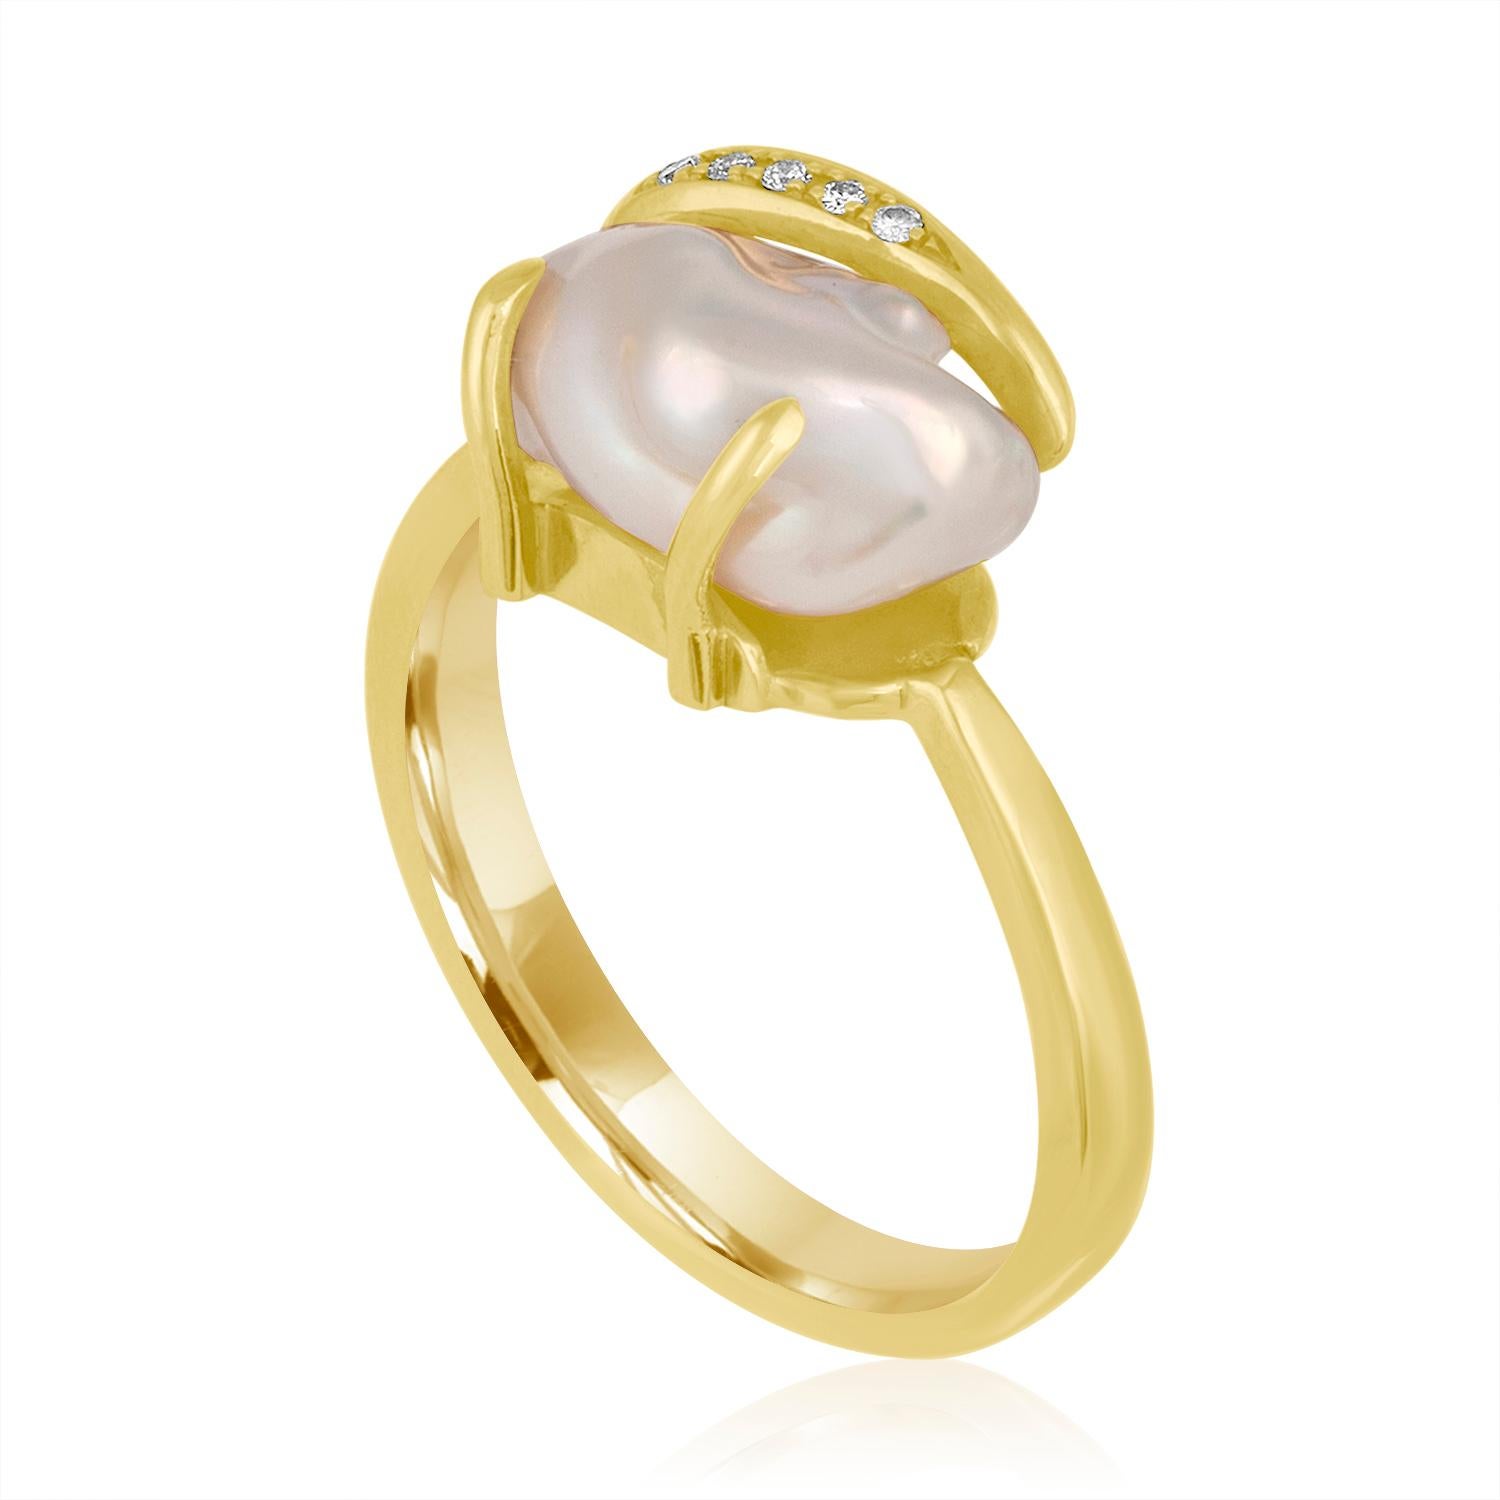 The ring is 18K Yellow Gold
There are 0.04 Carats in Diamonds G VS
The baroque pearl is 12.73mm x 8.00mm Freshwater Cultured
The ring is a size 7, sizable
The ring weighs 5.3 grams